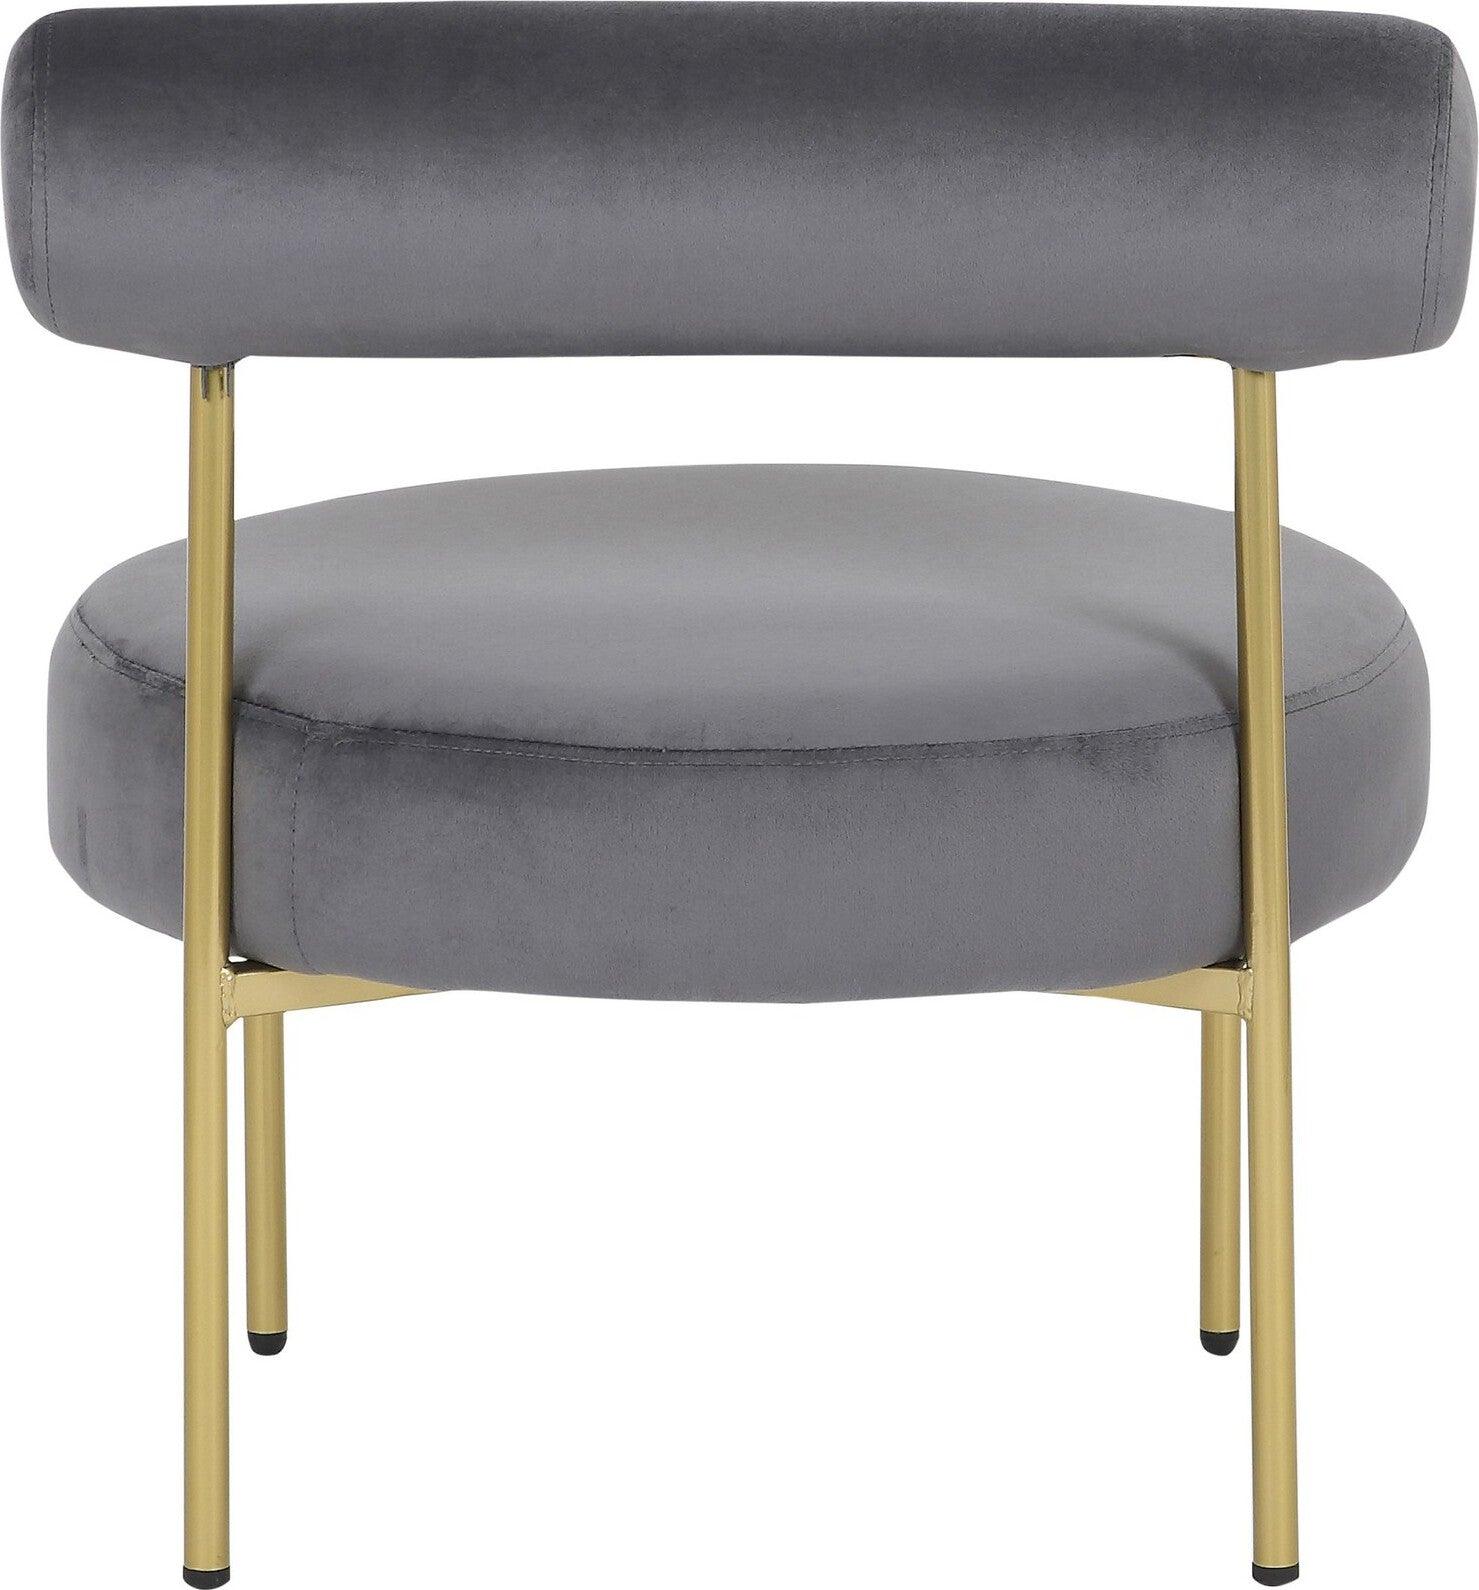 Lumisource Accent Chairs - Rhonda Accent Chair Gold & Silver